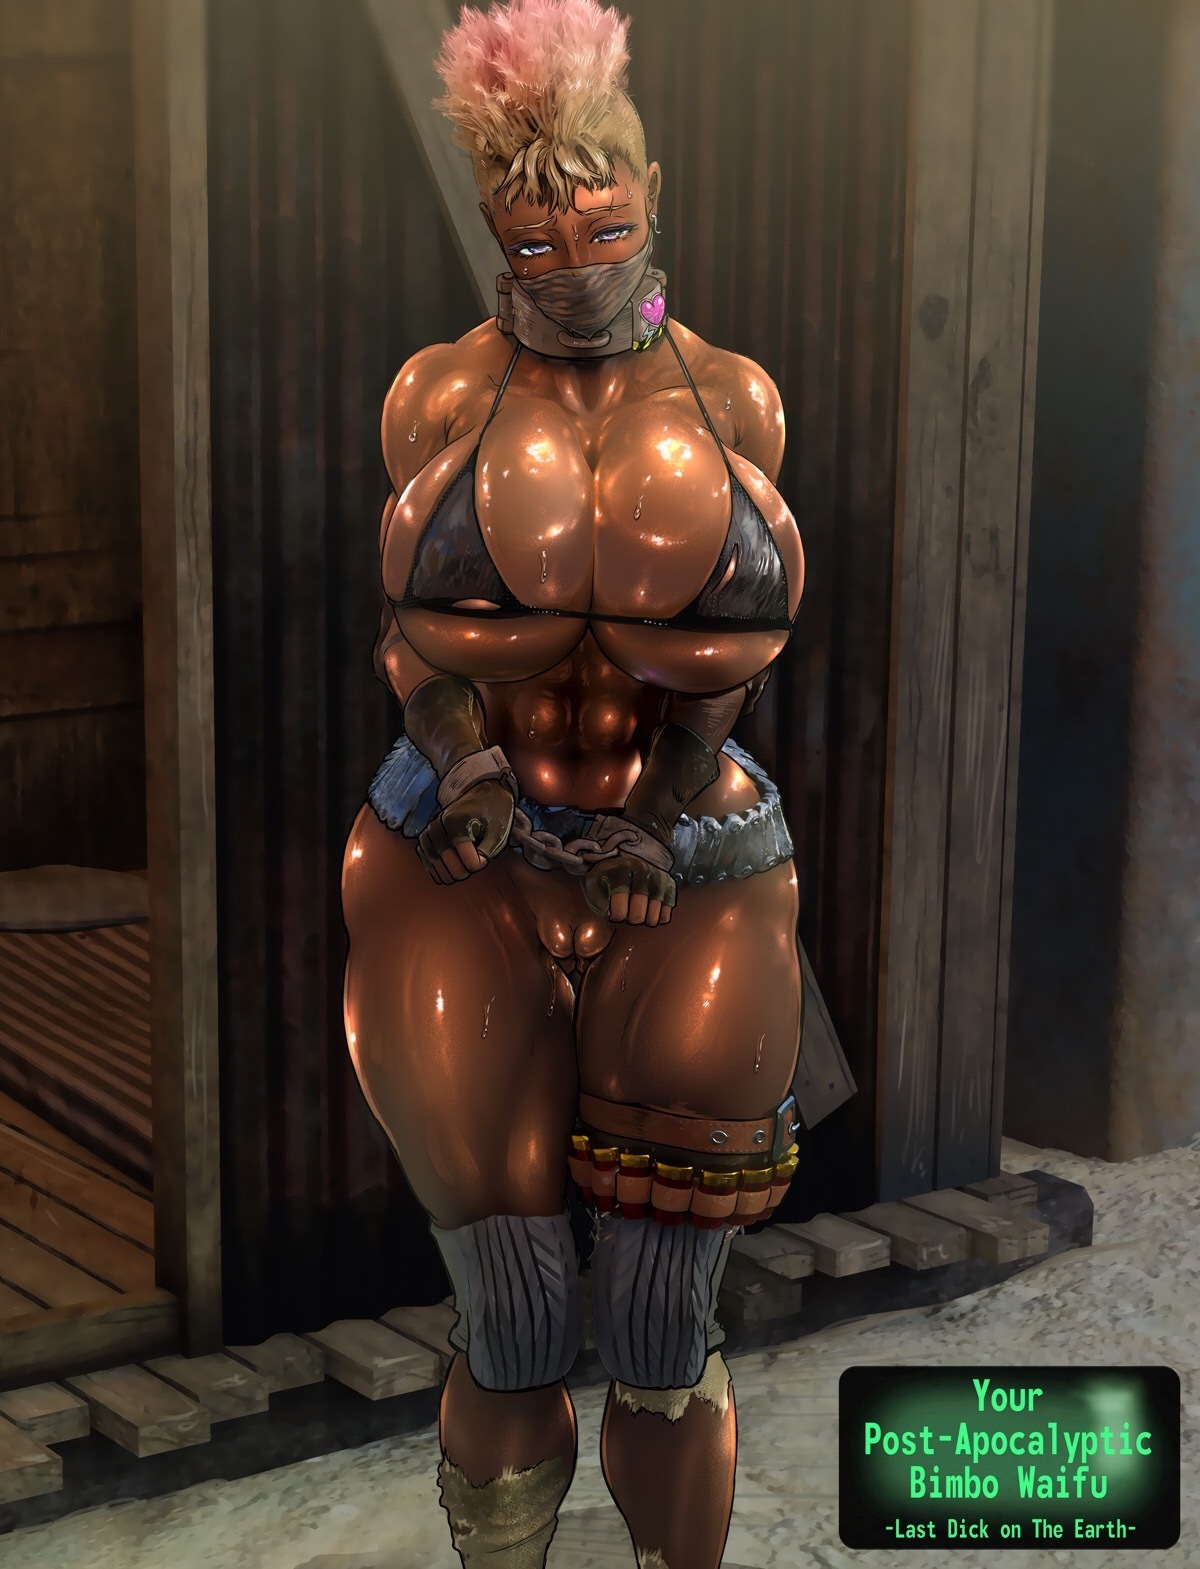 Fallout 4 Raider Porn - MECHANICAL TEMPTS - Fallout Hentai - Recommendations